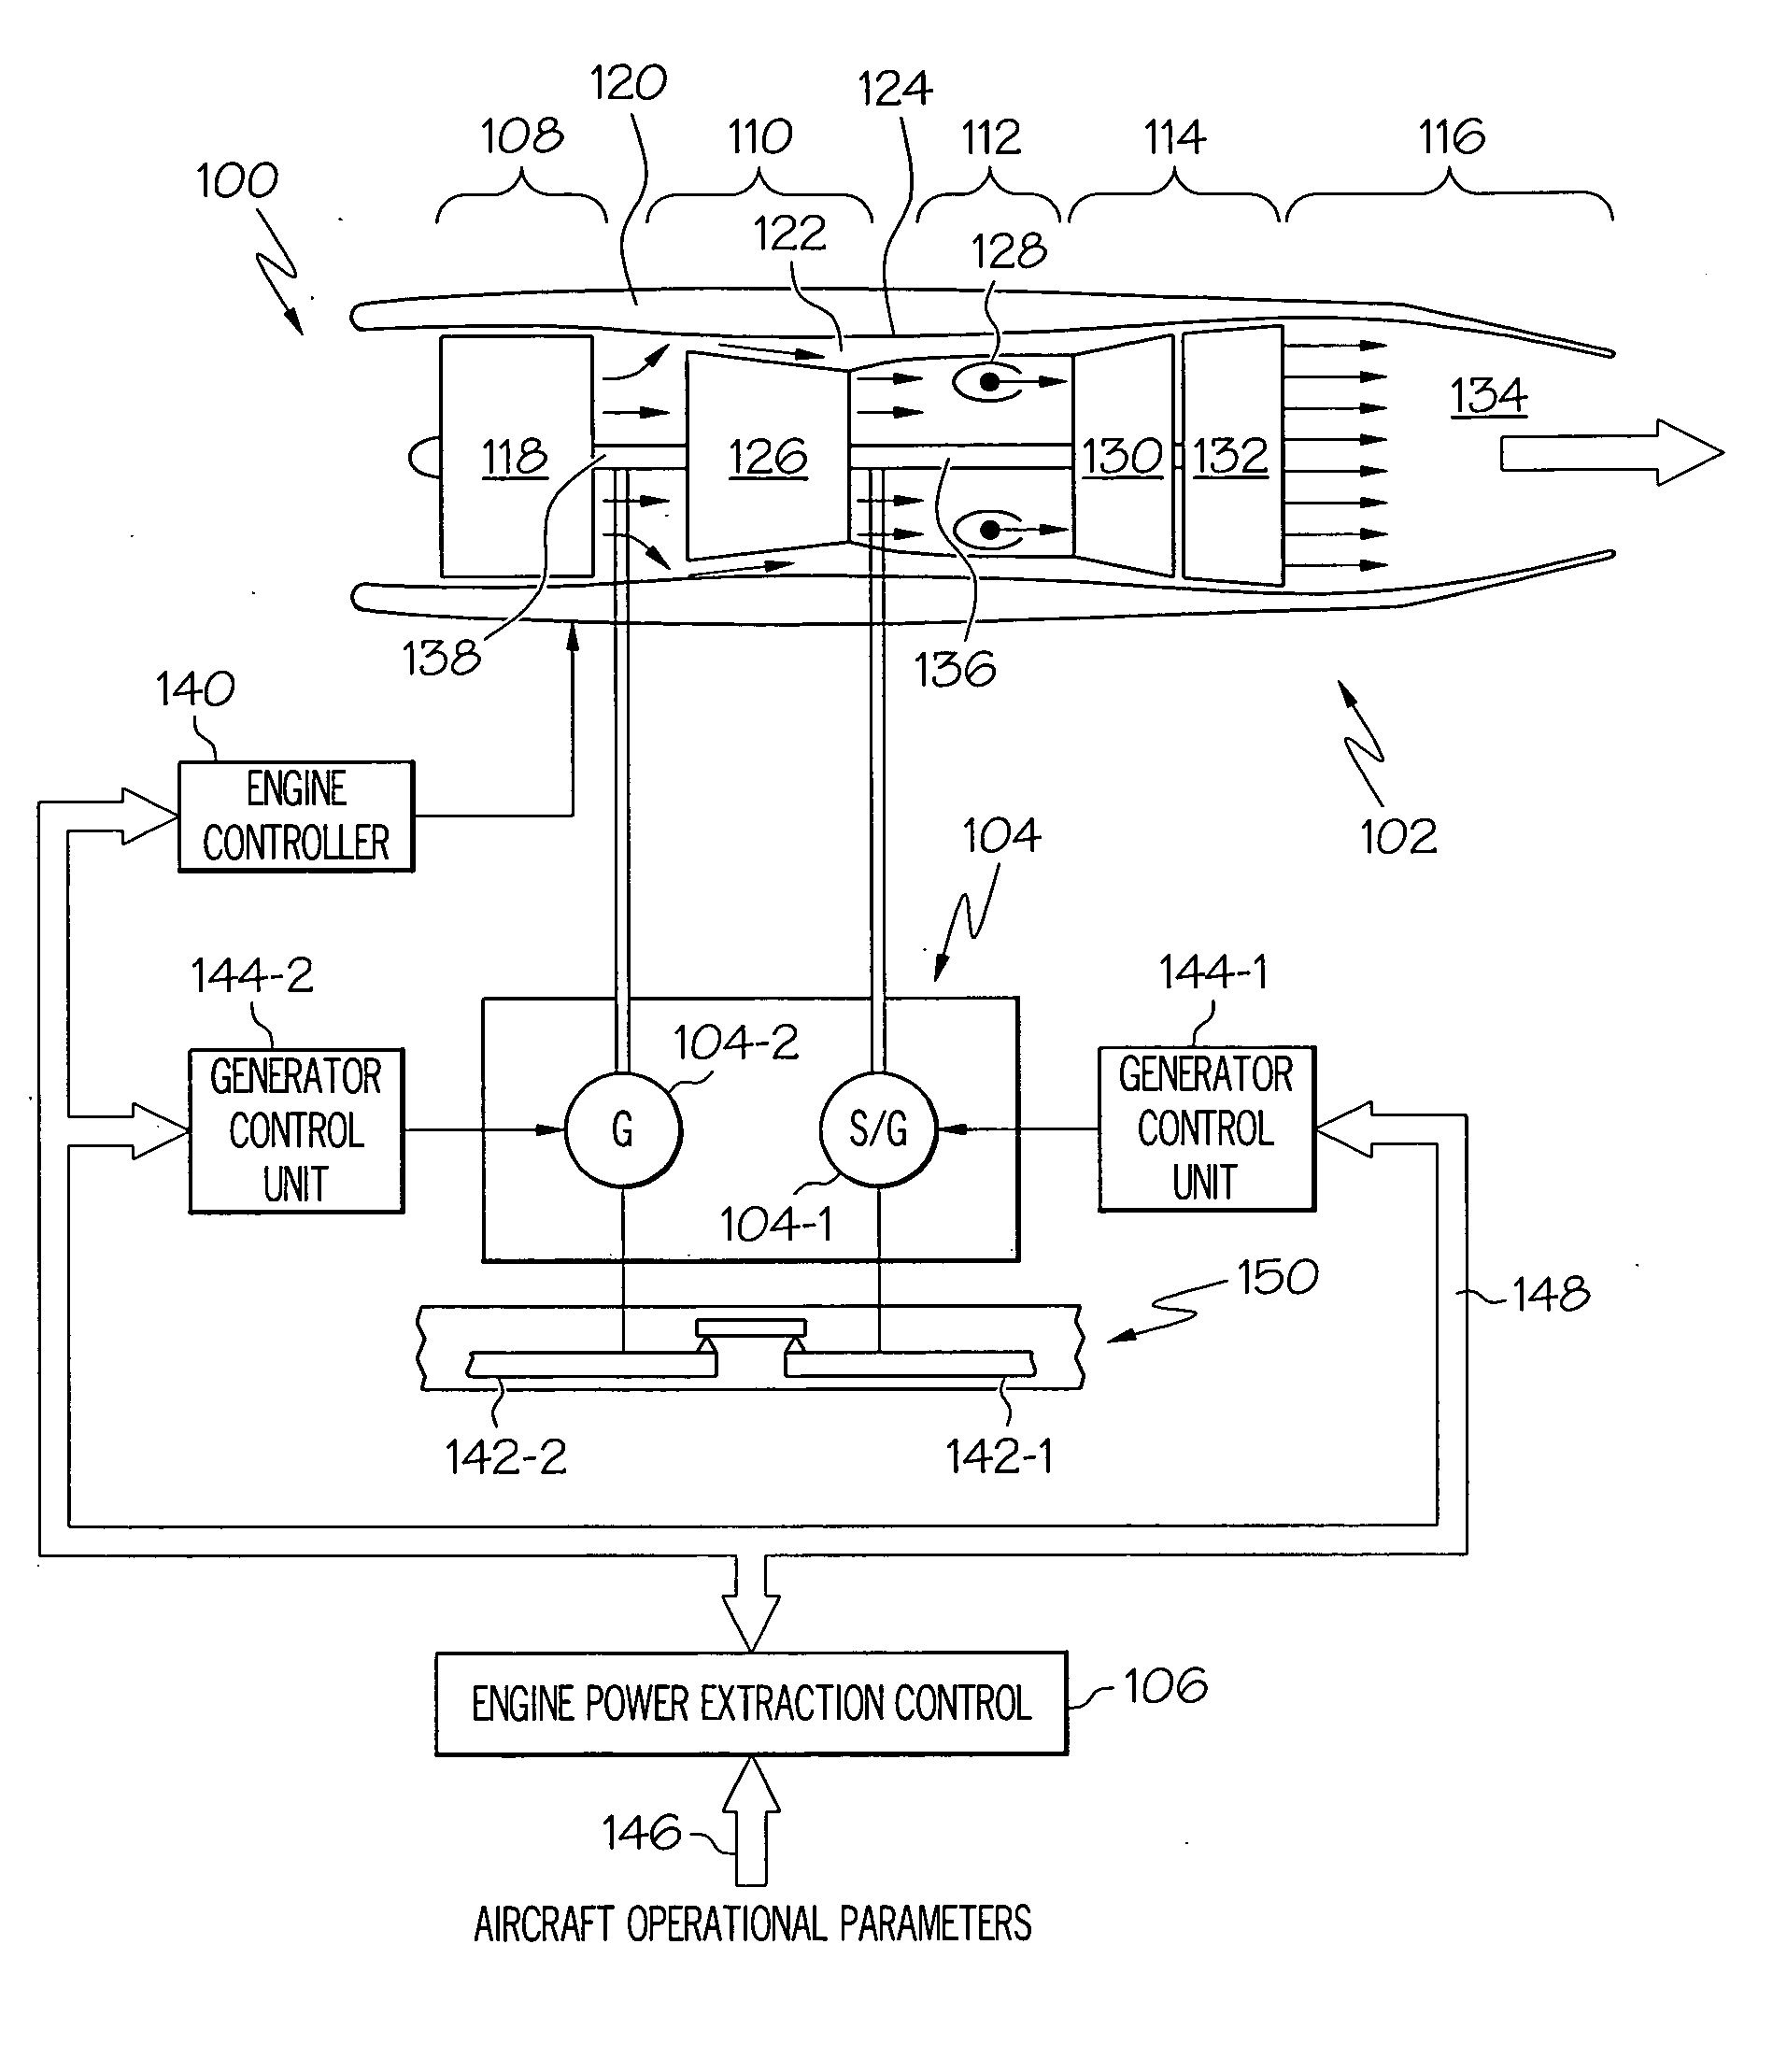 Engine power extraction control system